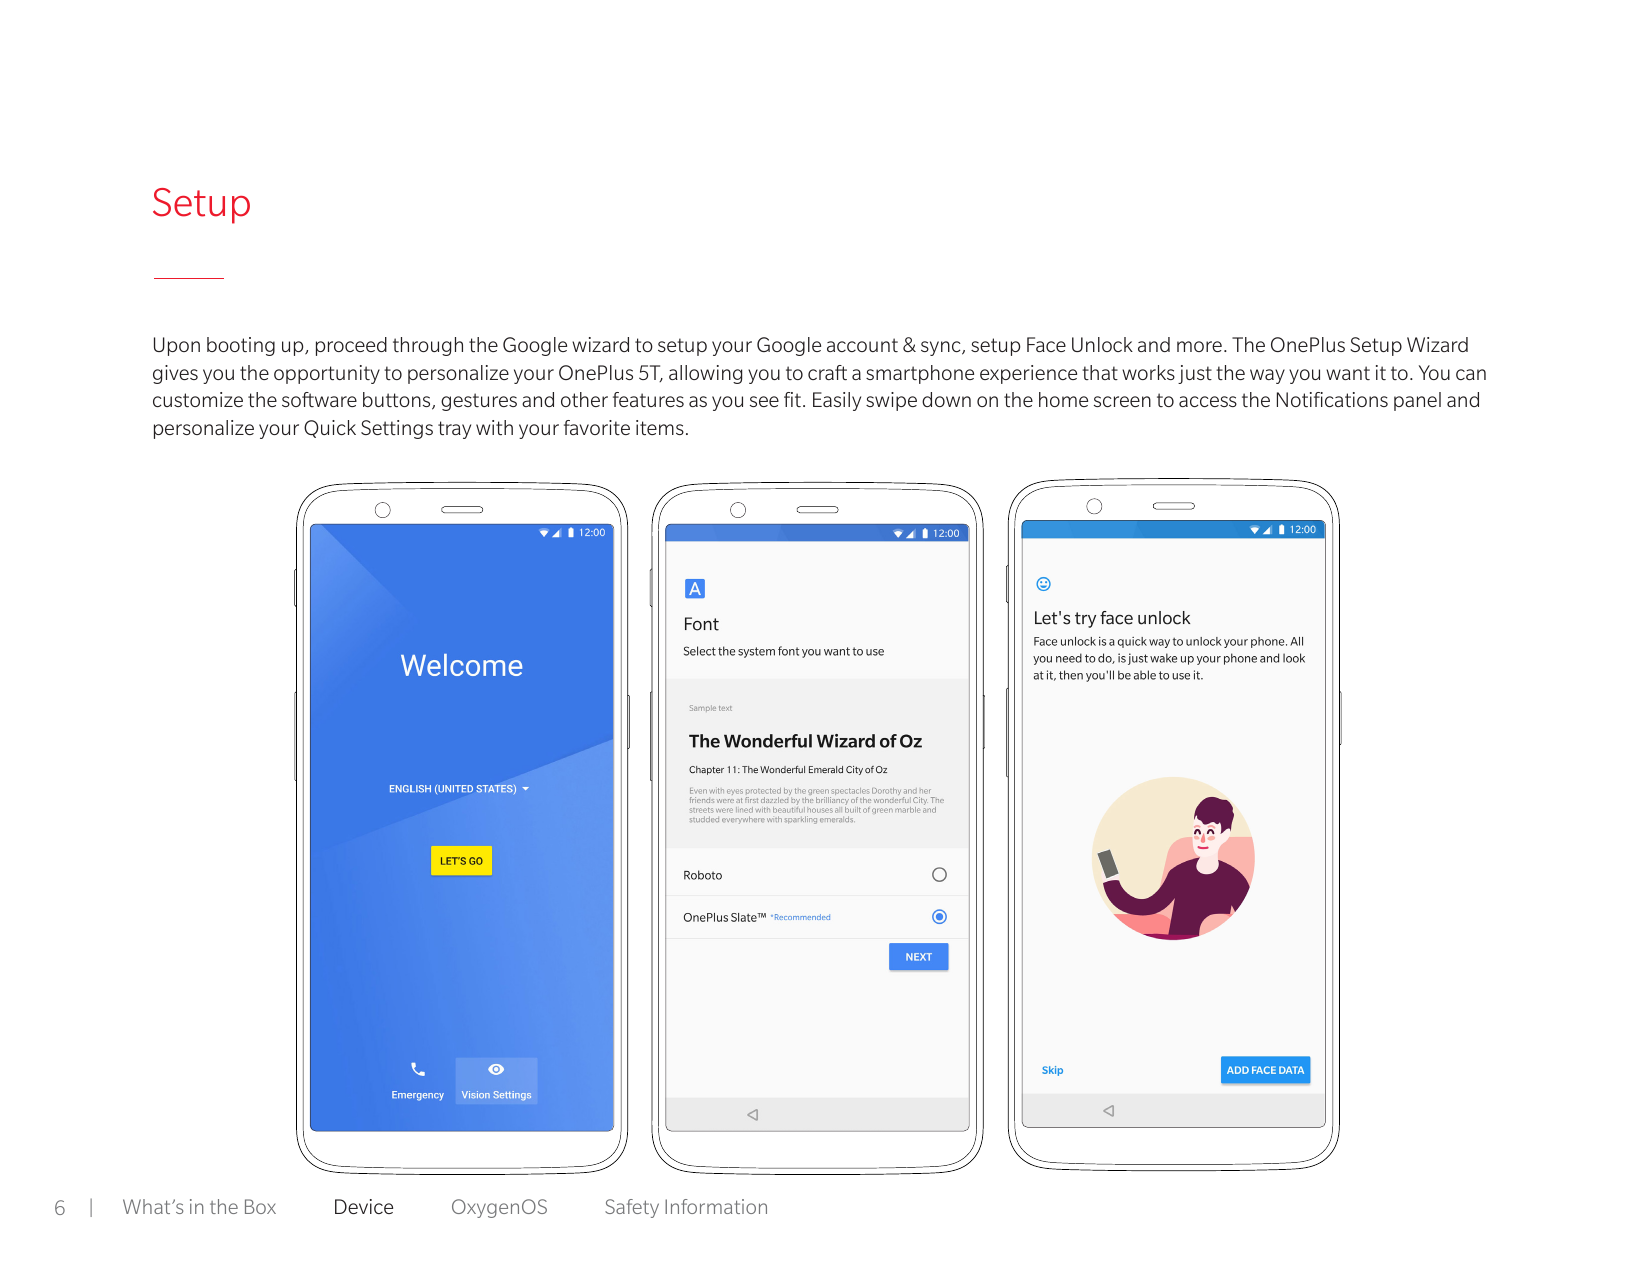 SetupUpon booting up, proceed through the Google wizard to setup your Google account & sync, setup Face Unlock and more. The One